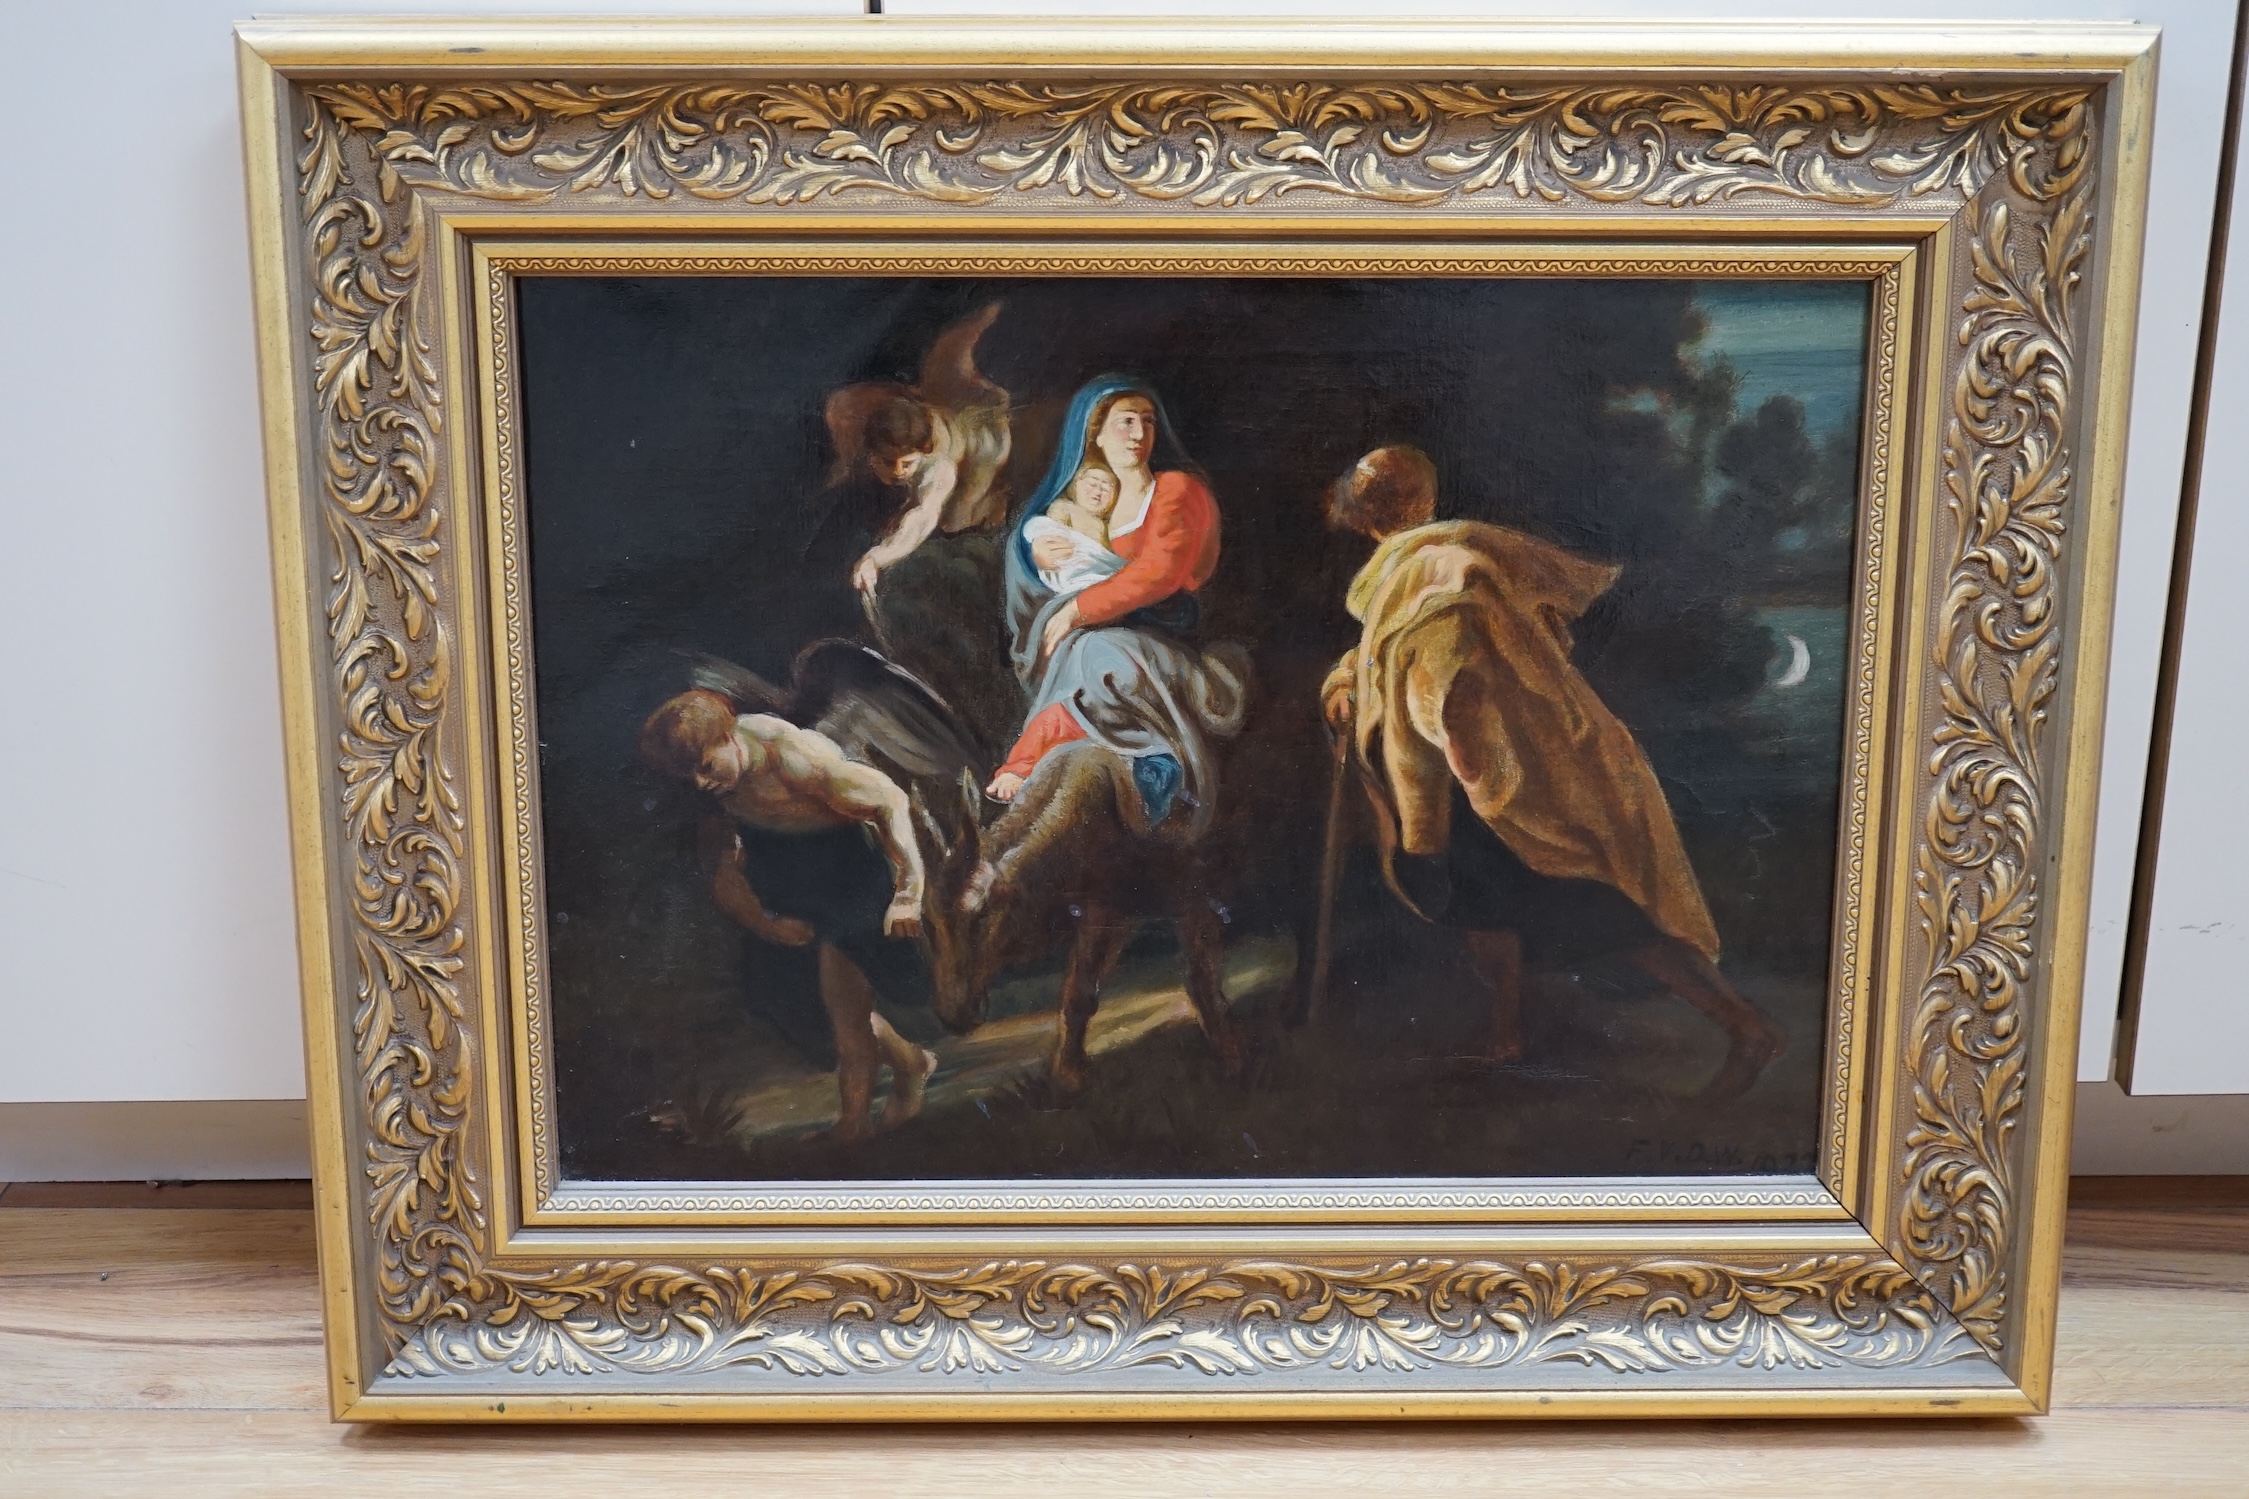 F.V.D.W. after Peter Paul Rubens (Flemish, 1577-1640), oil on canvas, 'The Flight into Egypt', monogrammed and dated 1922, 35 x 49cm, ornate gilt frame. Condition - fair, canvas sagging slightly